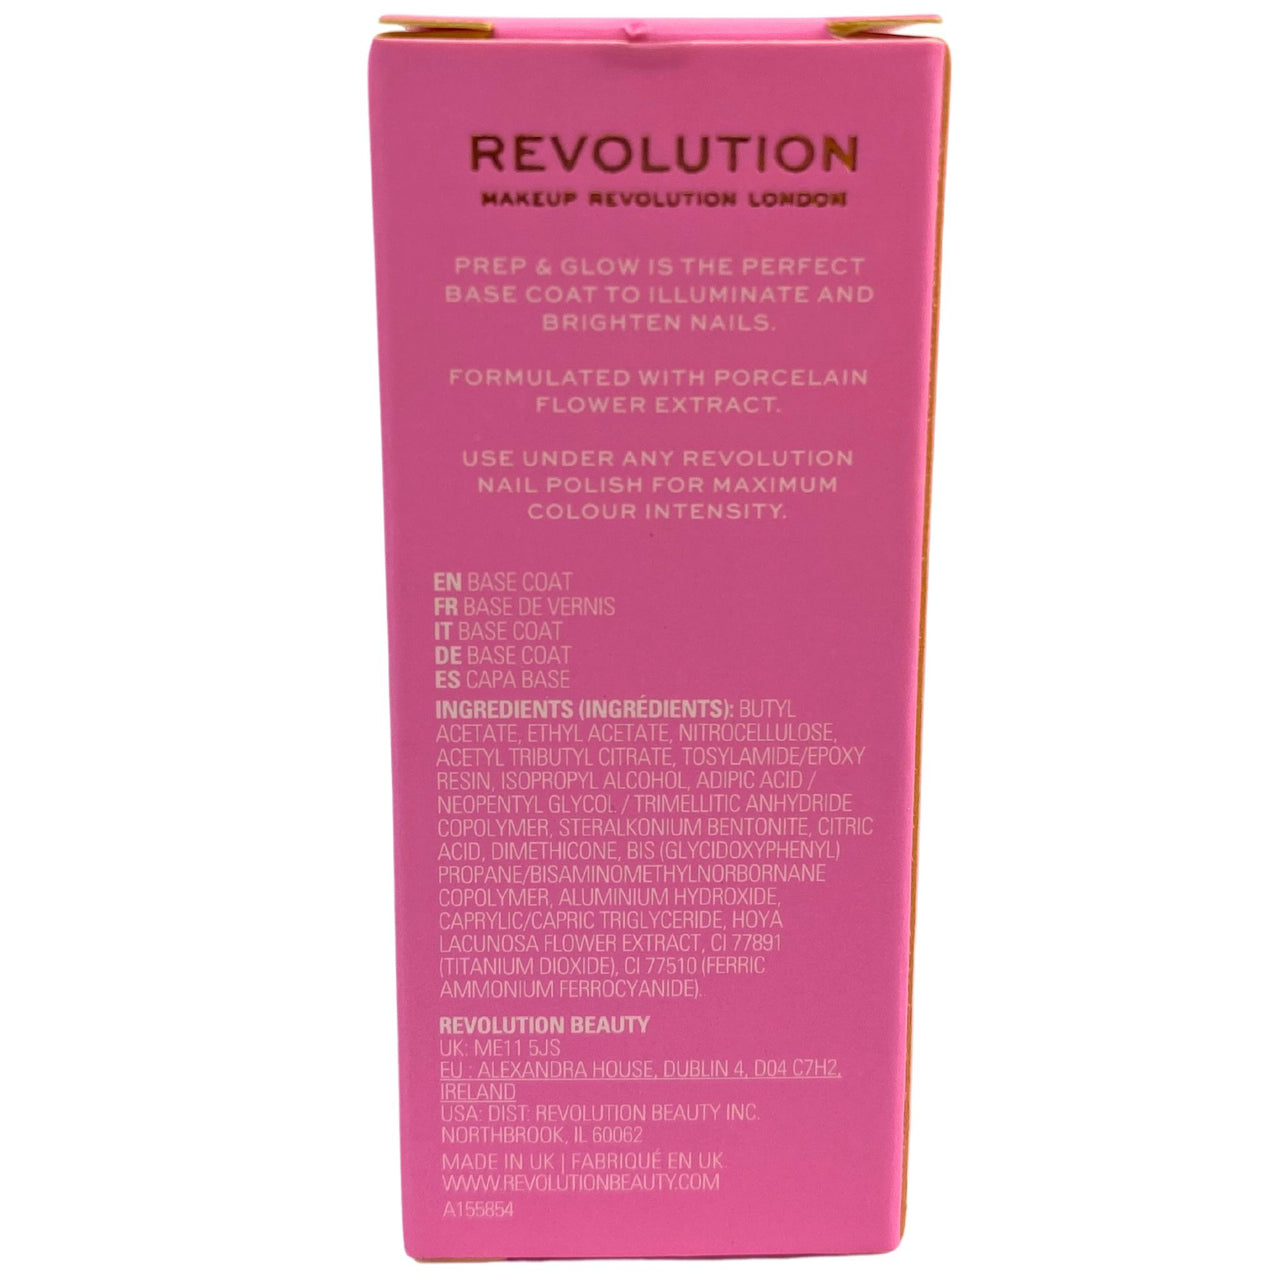 Revolution Prep & Glow Base Coat with Porcelain Flower Extract 